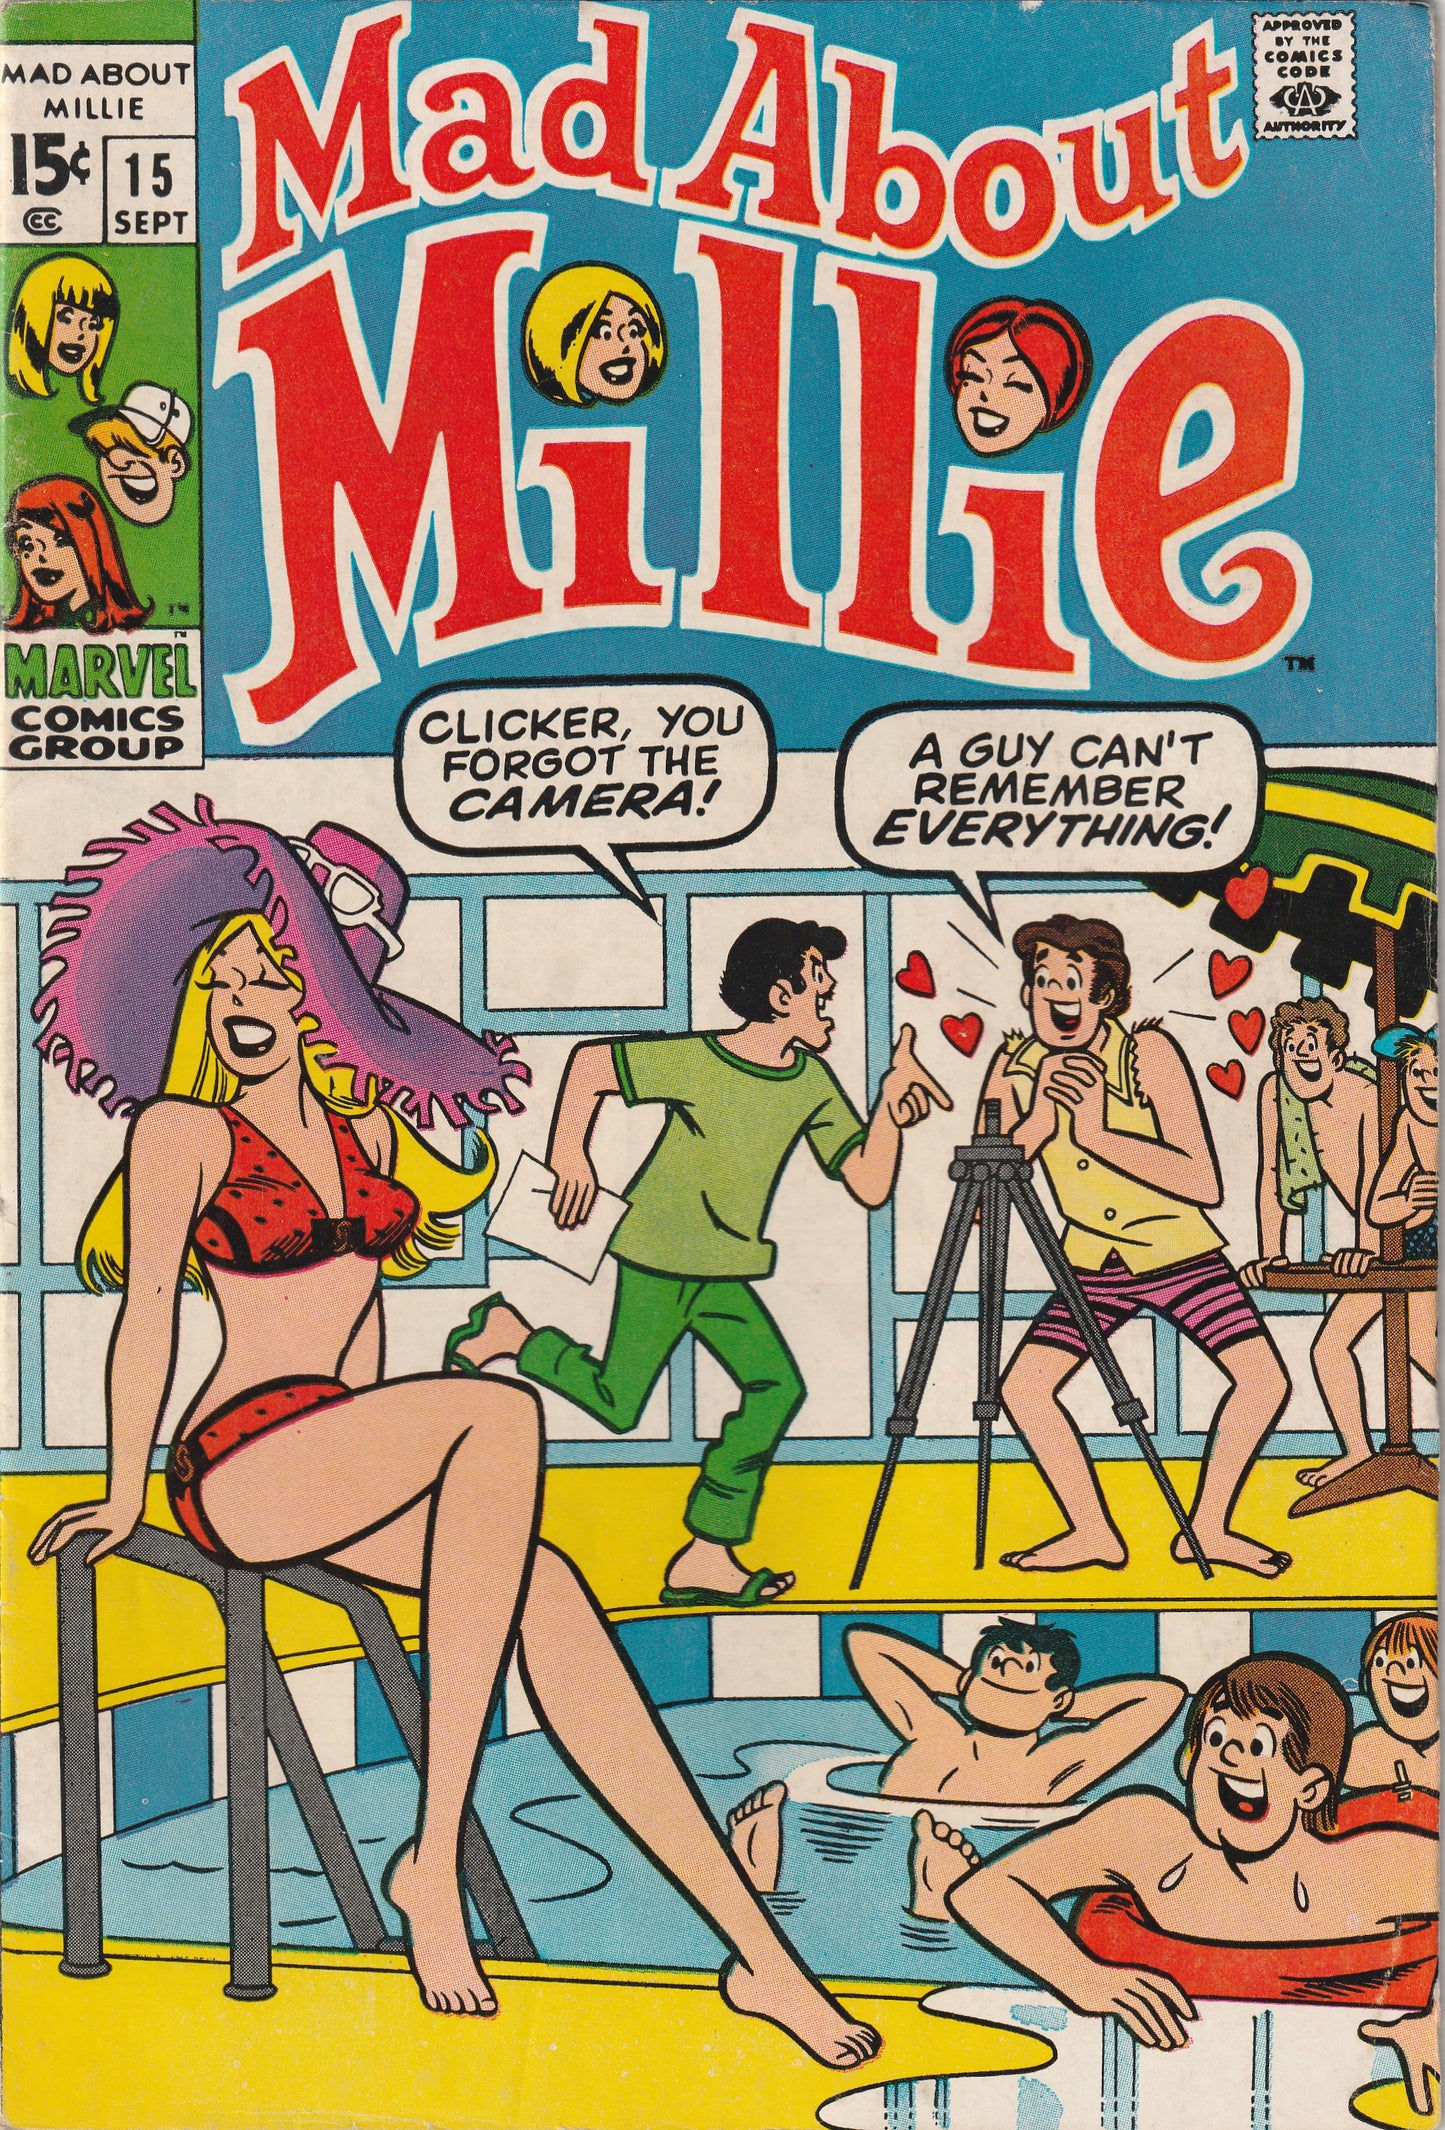 Mad About Millie #15 (1970)